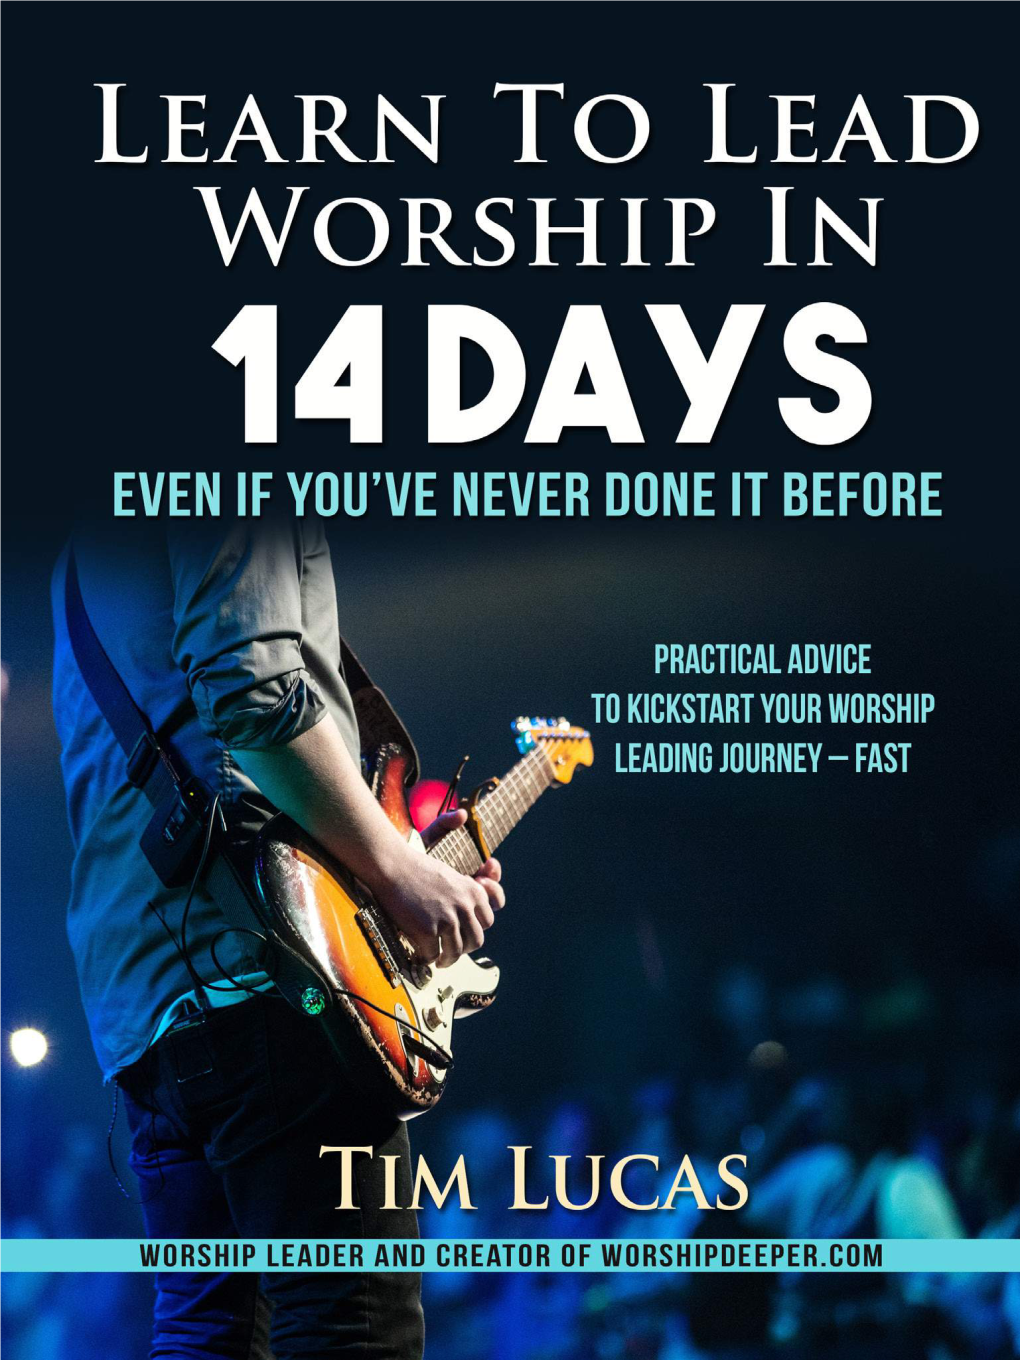 Book: Learn to Lead Worship in 14 Days